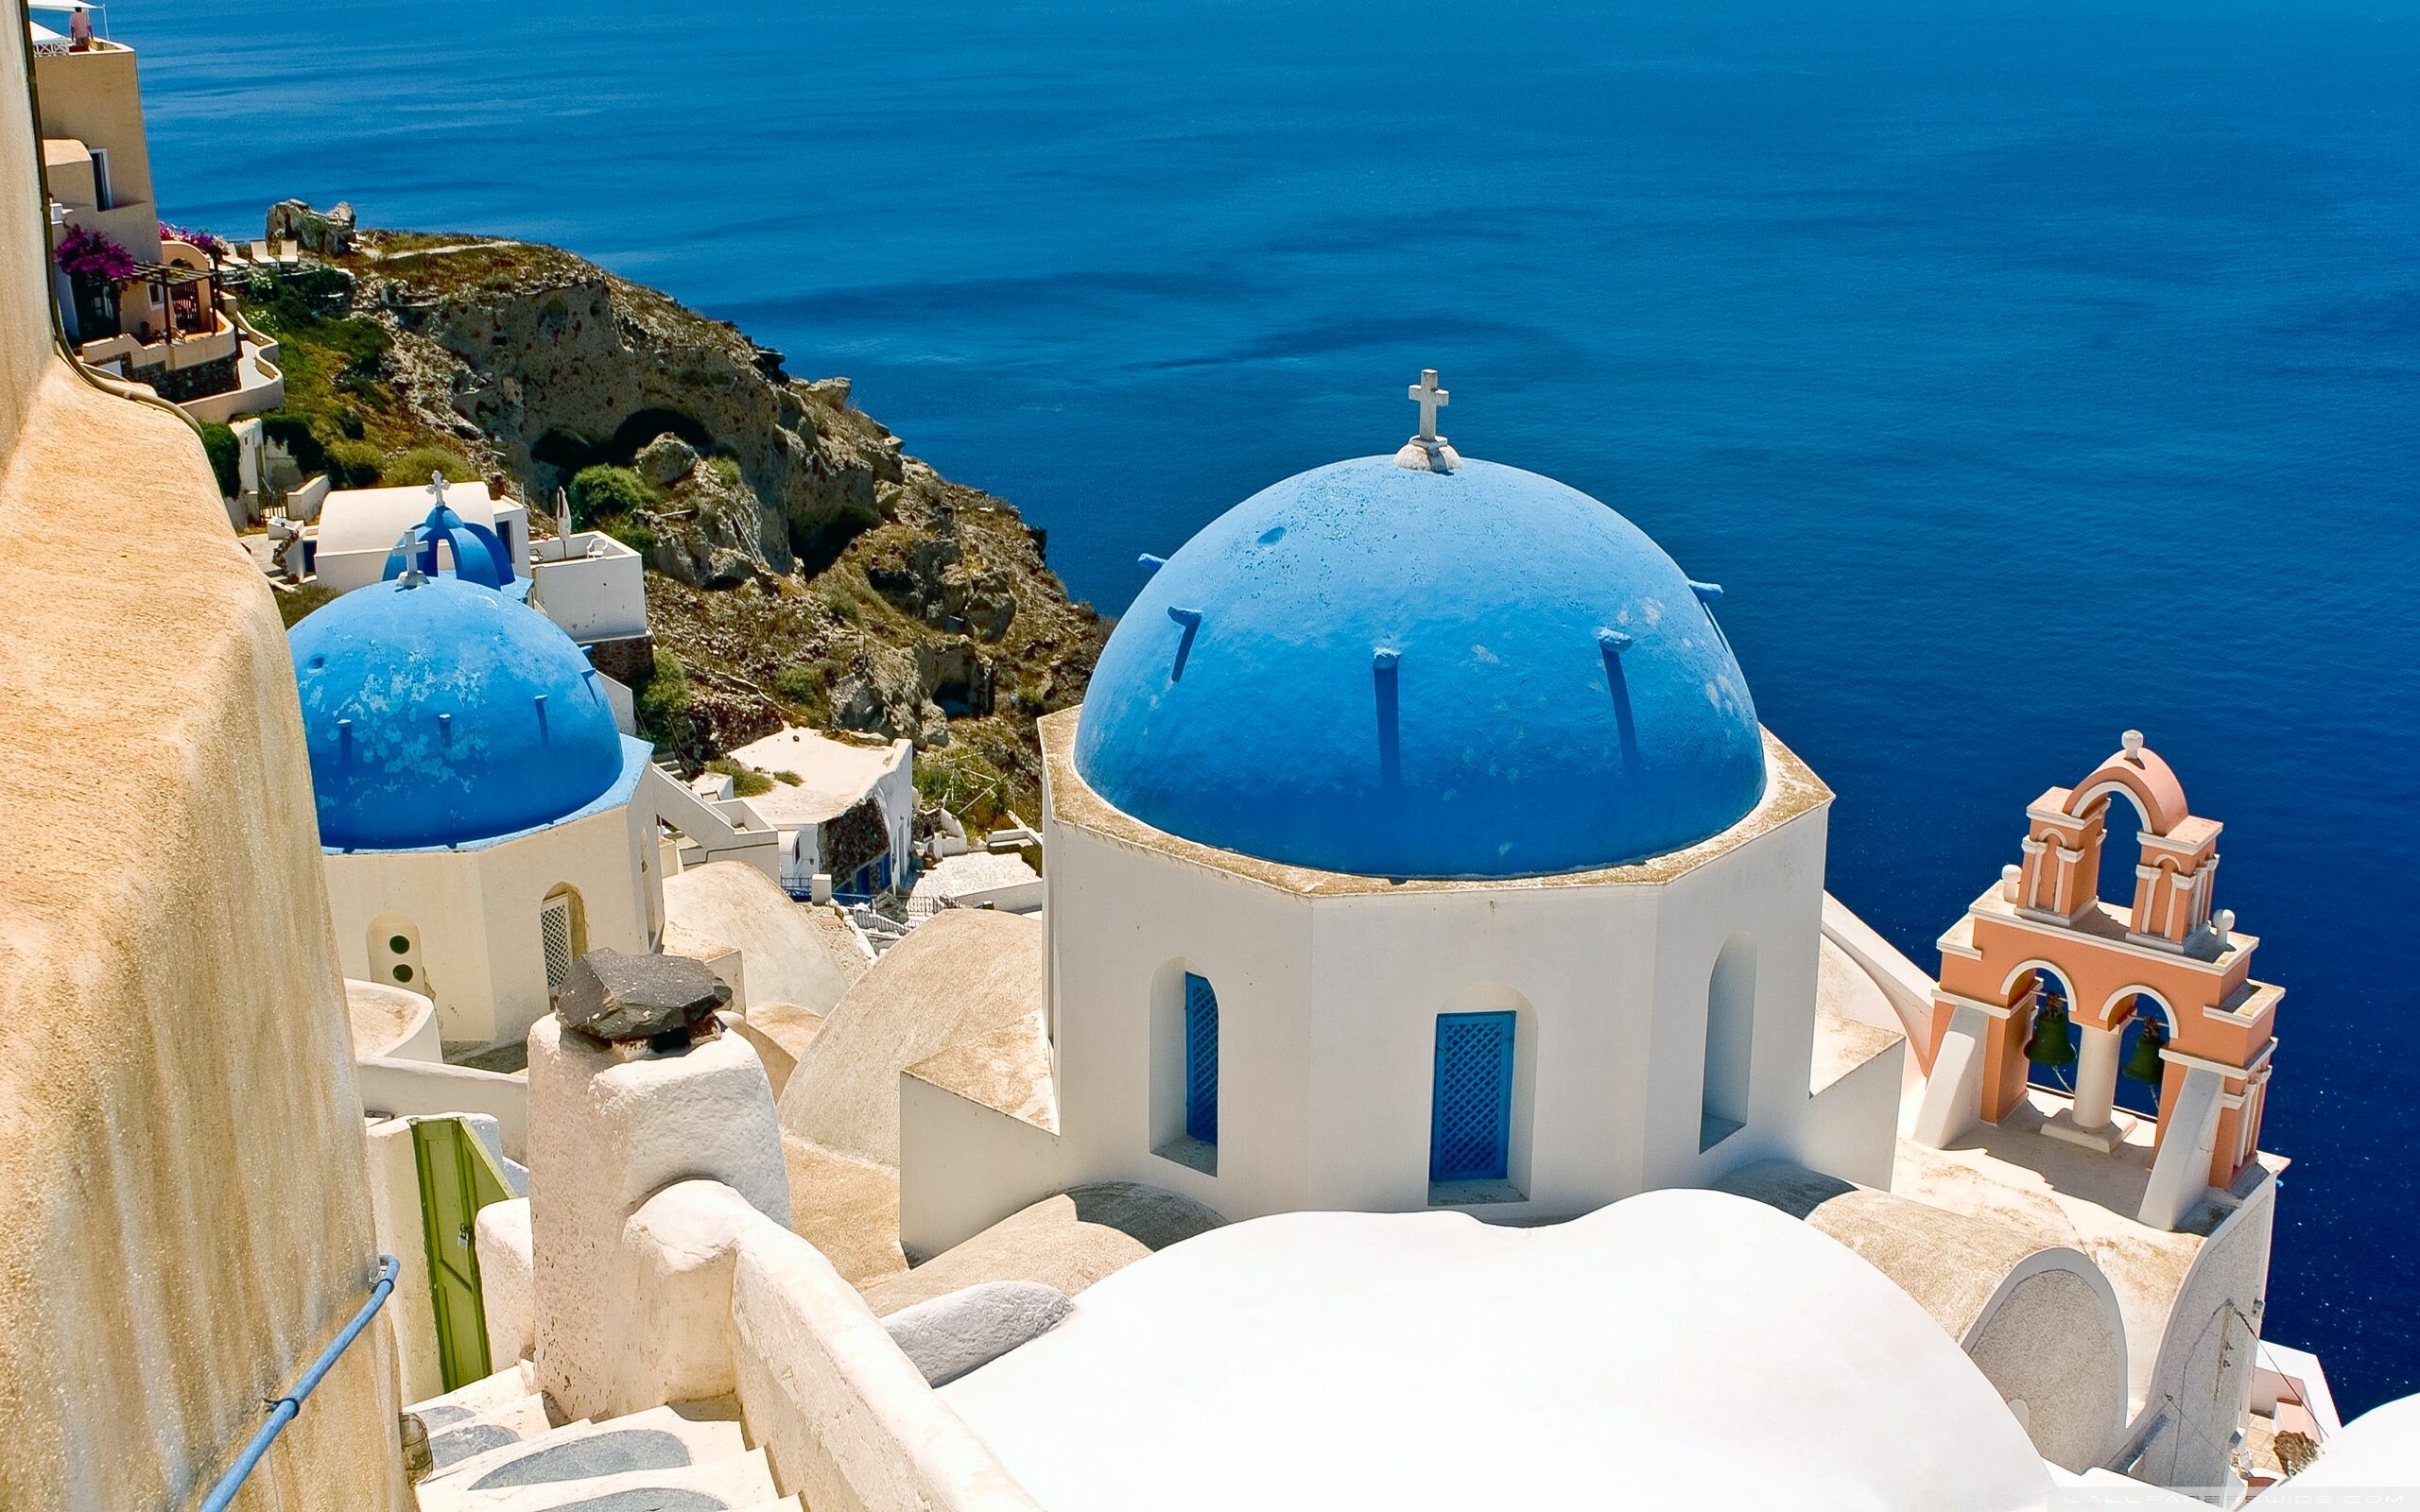 Greece Wallpaper: HD, 4K, 5K for PC and Mobile. Download free image for iPhone, Android